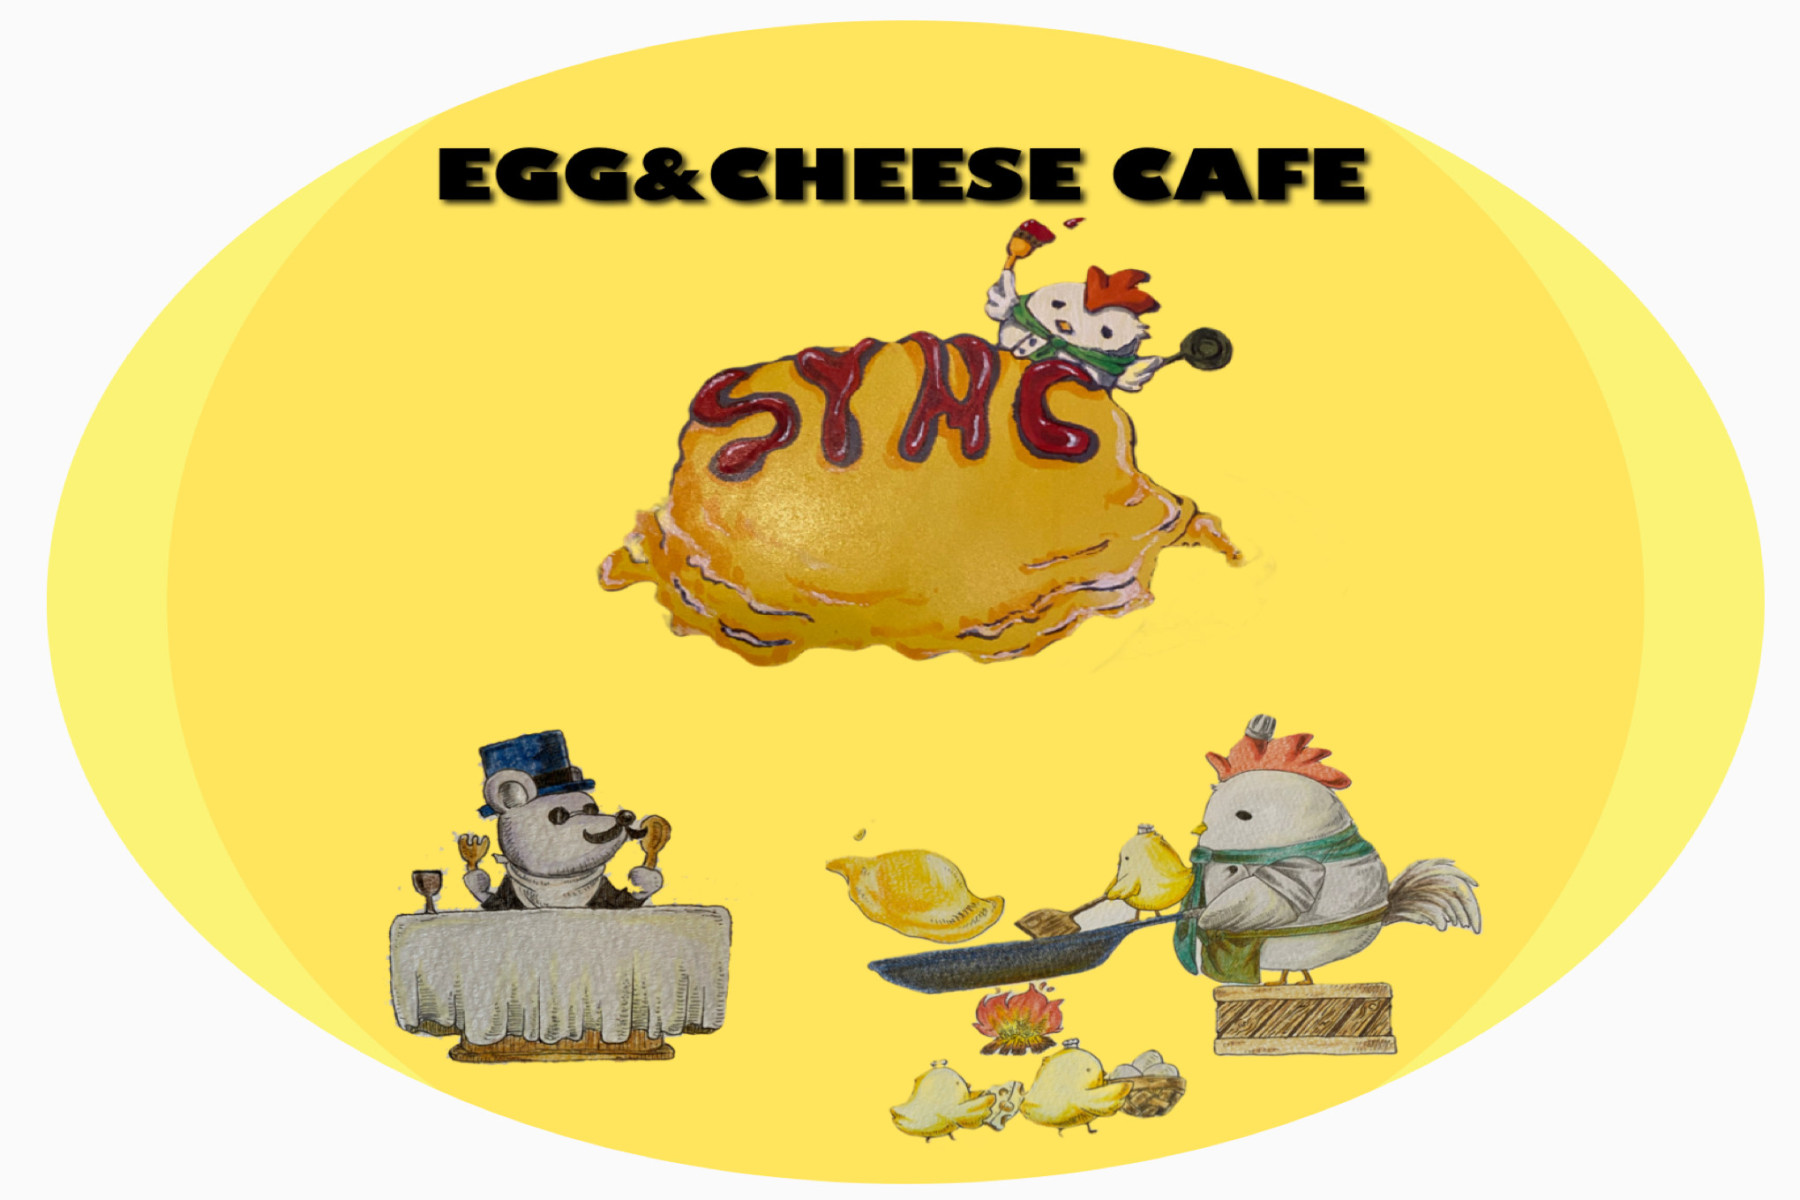 EGG&CHEESE CAFE SYNC